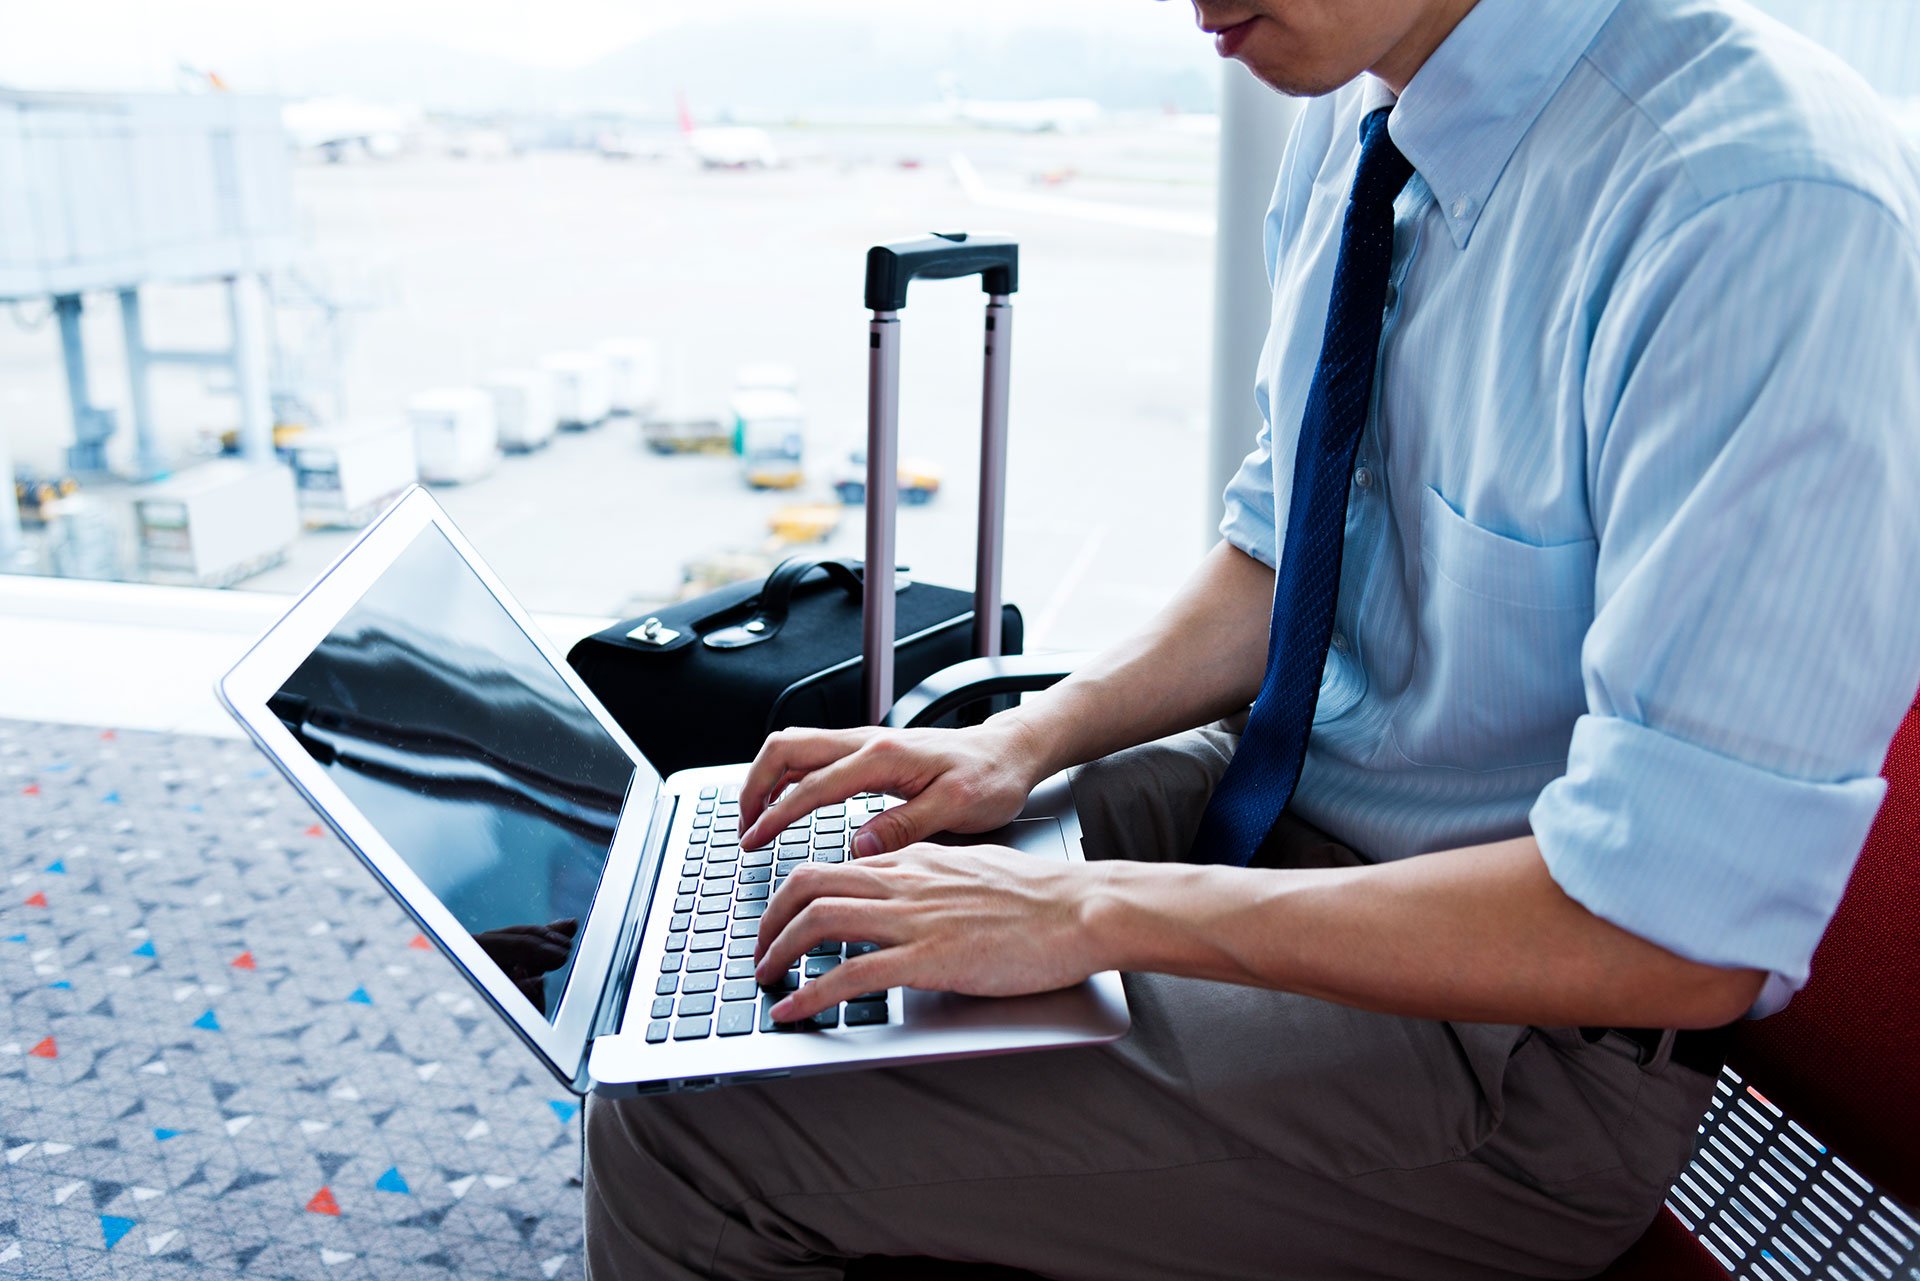 Man in business attire works on laptop at airport